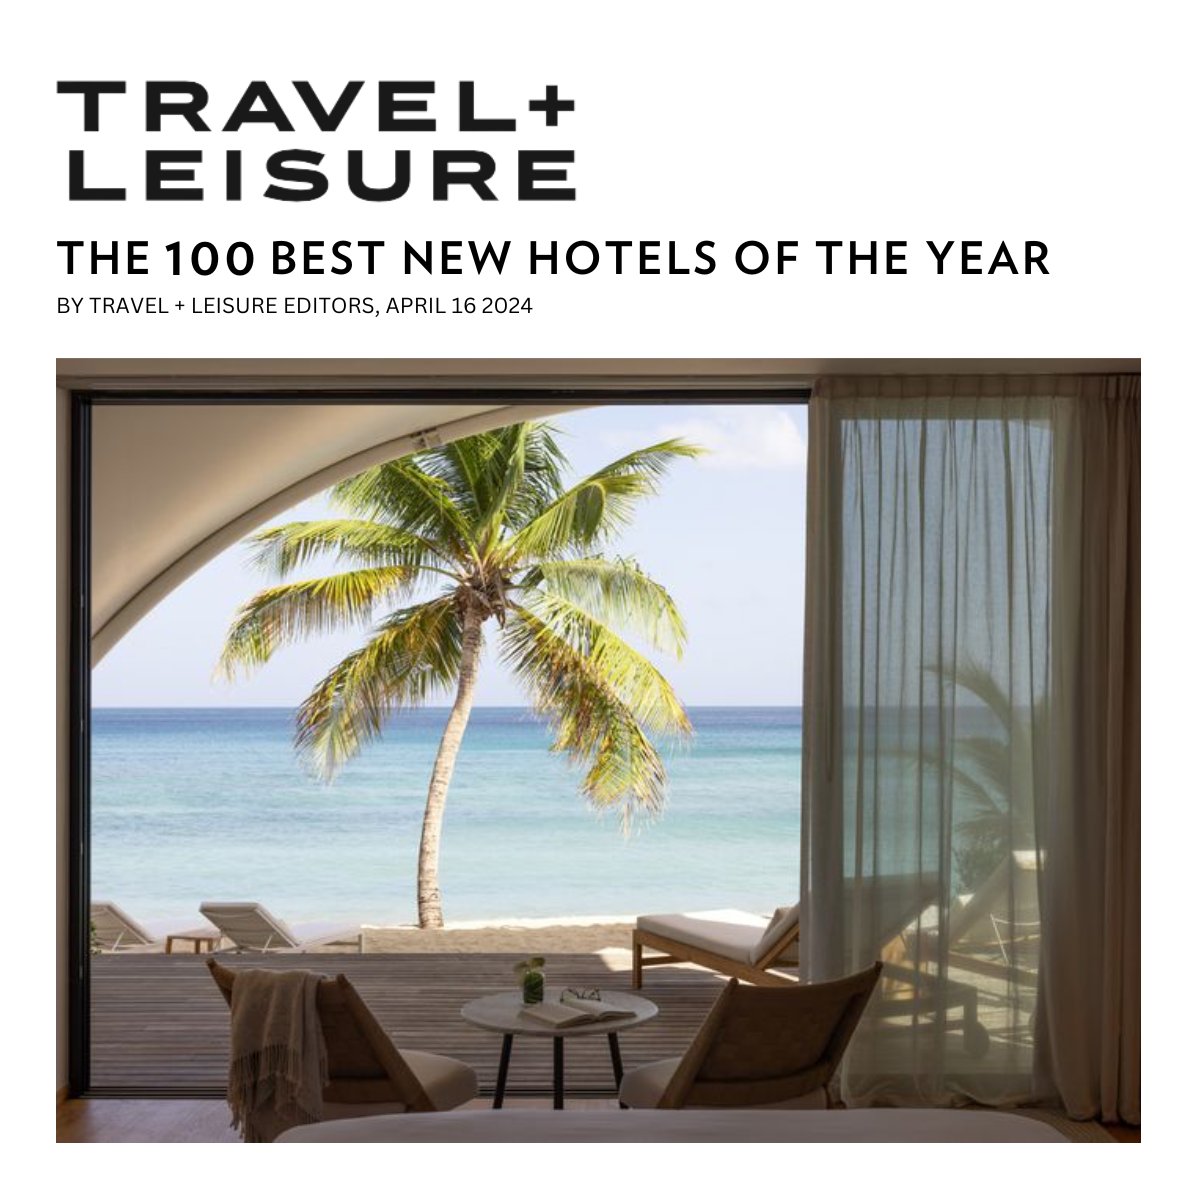 Check out the full article here: travelandleisure.com/best-new-hotel… @SilversandsGND